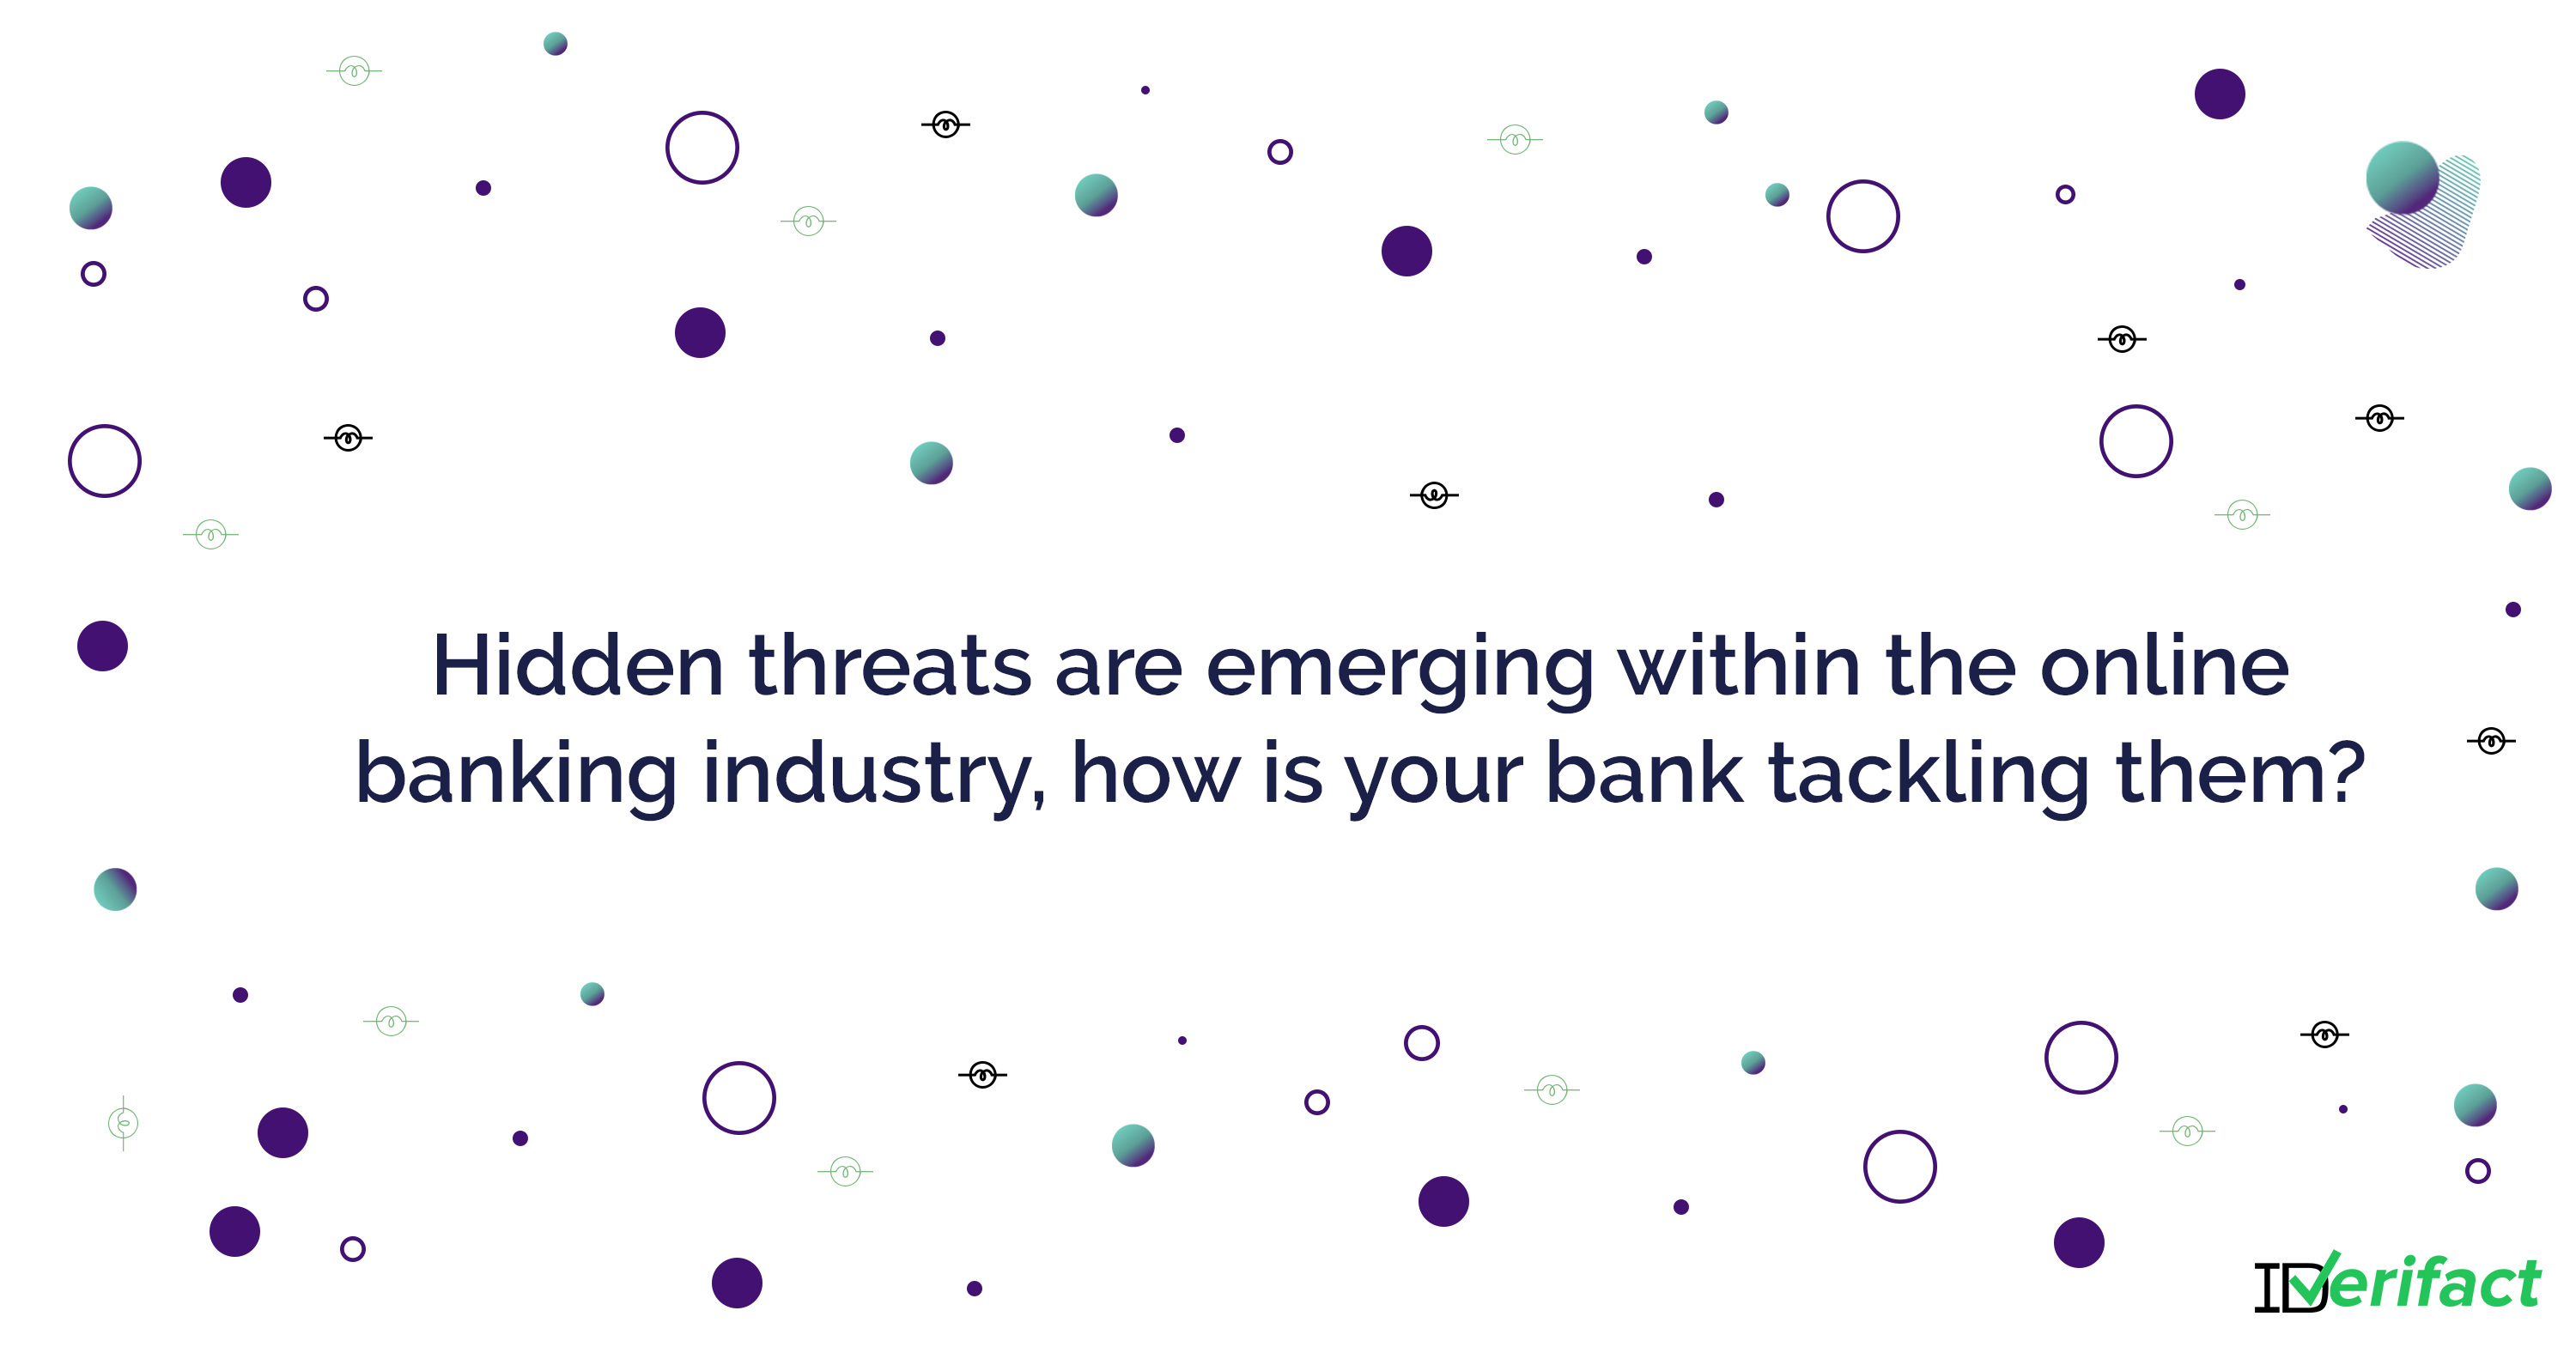 Hidden threats are emerging within the online banking industry, how is your bank tackling them?